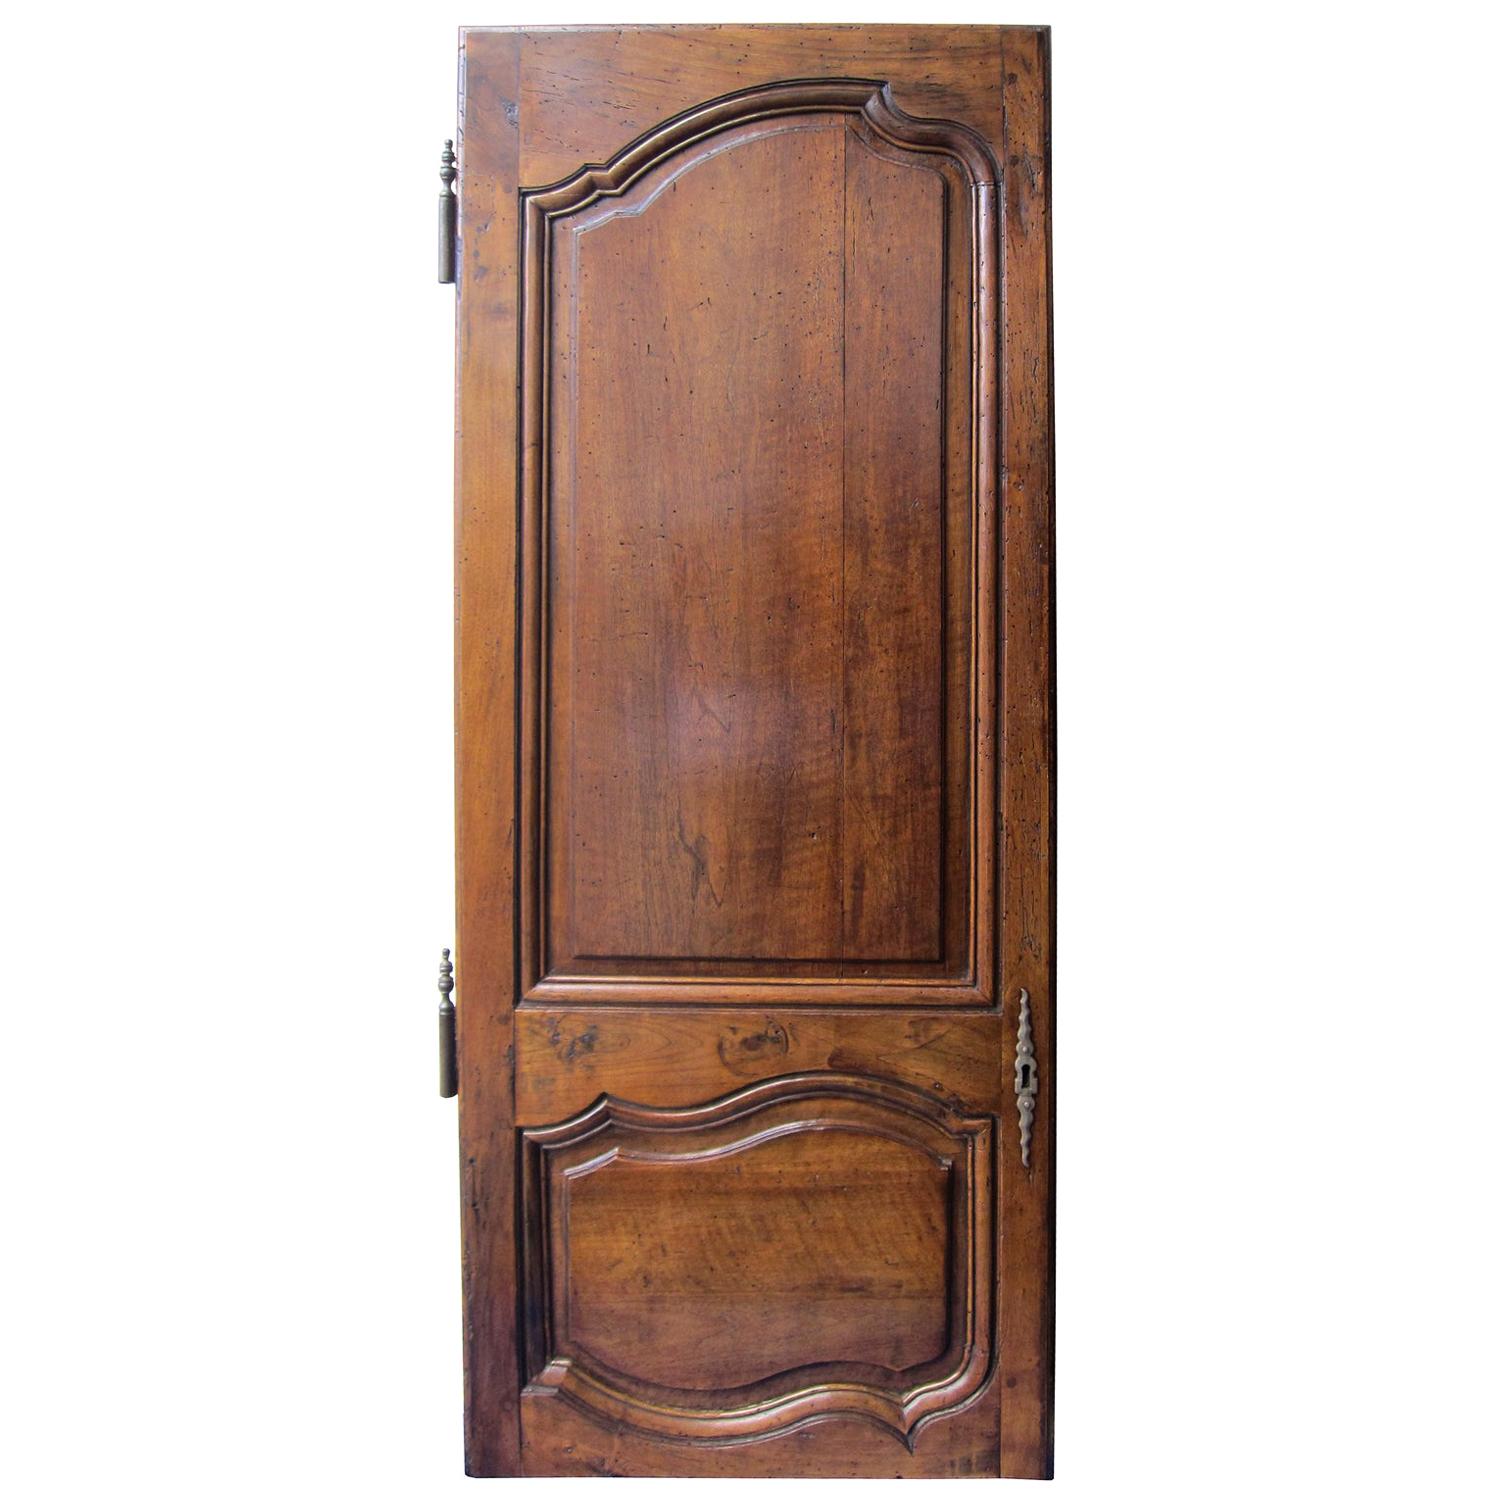 19th Century Carved Armoire Door